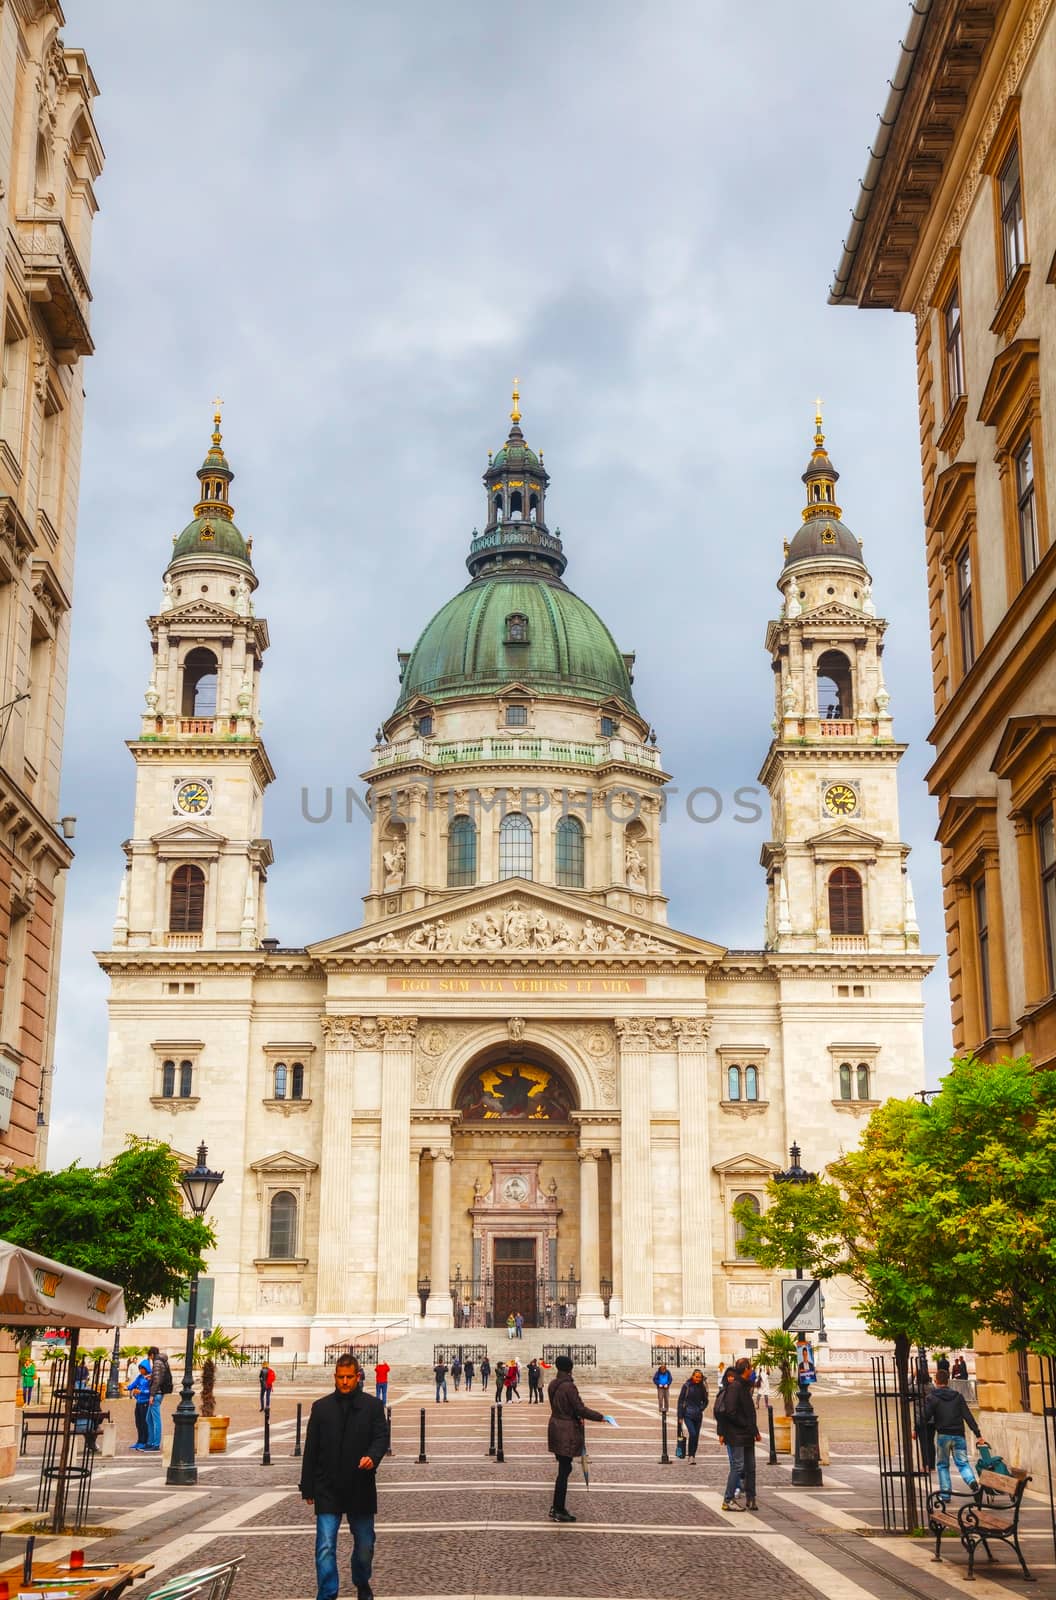 BUDAPEST - OCTOBER 22: St. Stephen (St. Istvan) on October 22, 2014 Basilica in Budapest, Hungary. It is the third largest church building in present-day Hungary.